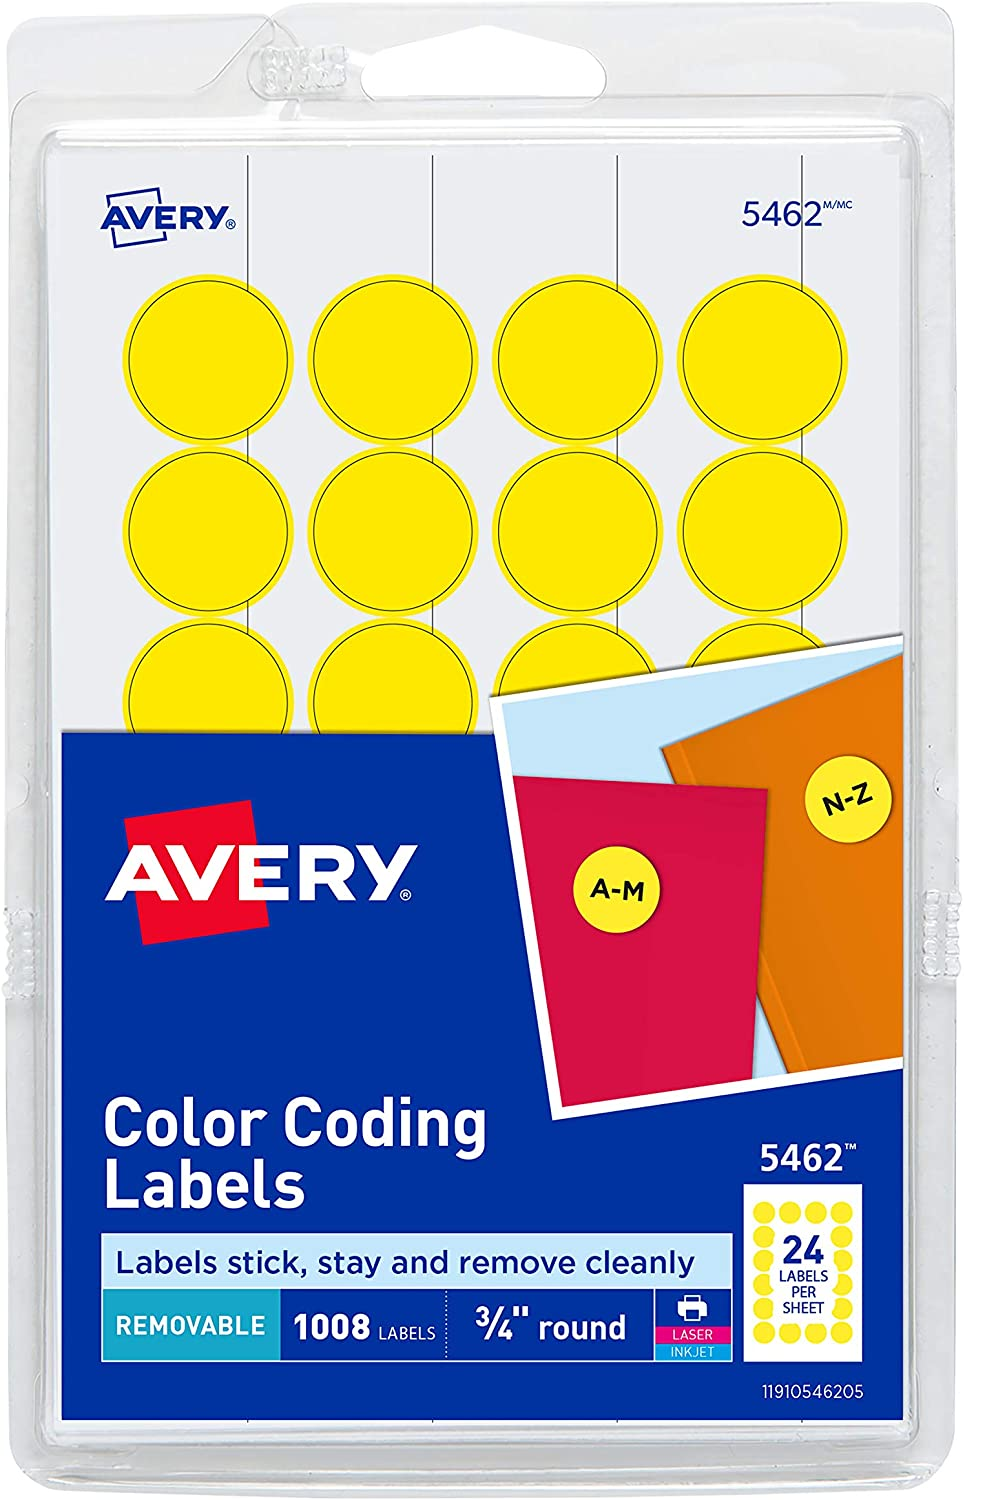 Avery Self-Adhesive Hole Reinforcement Stickers, 1/4 Diameter